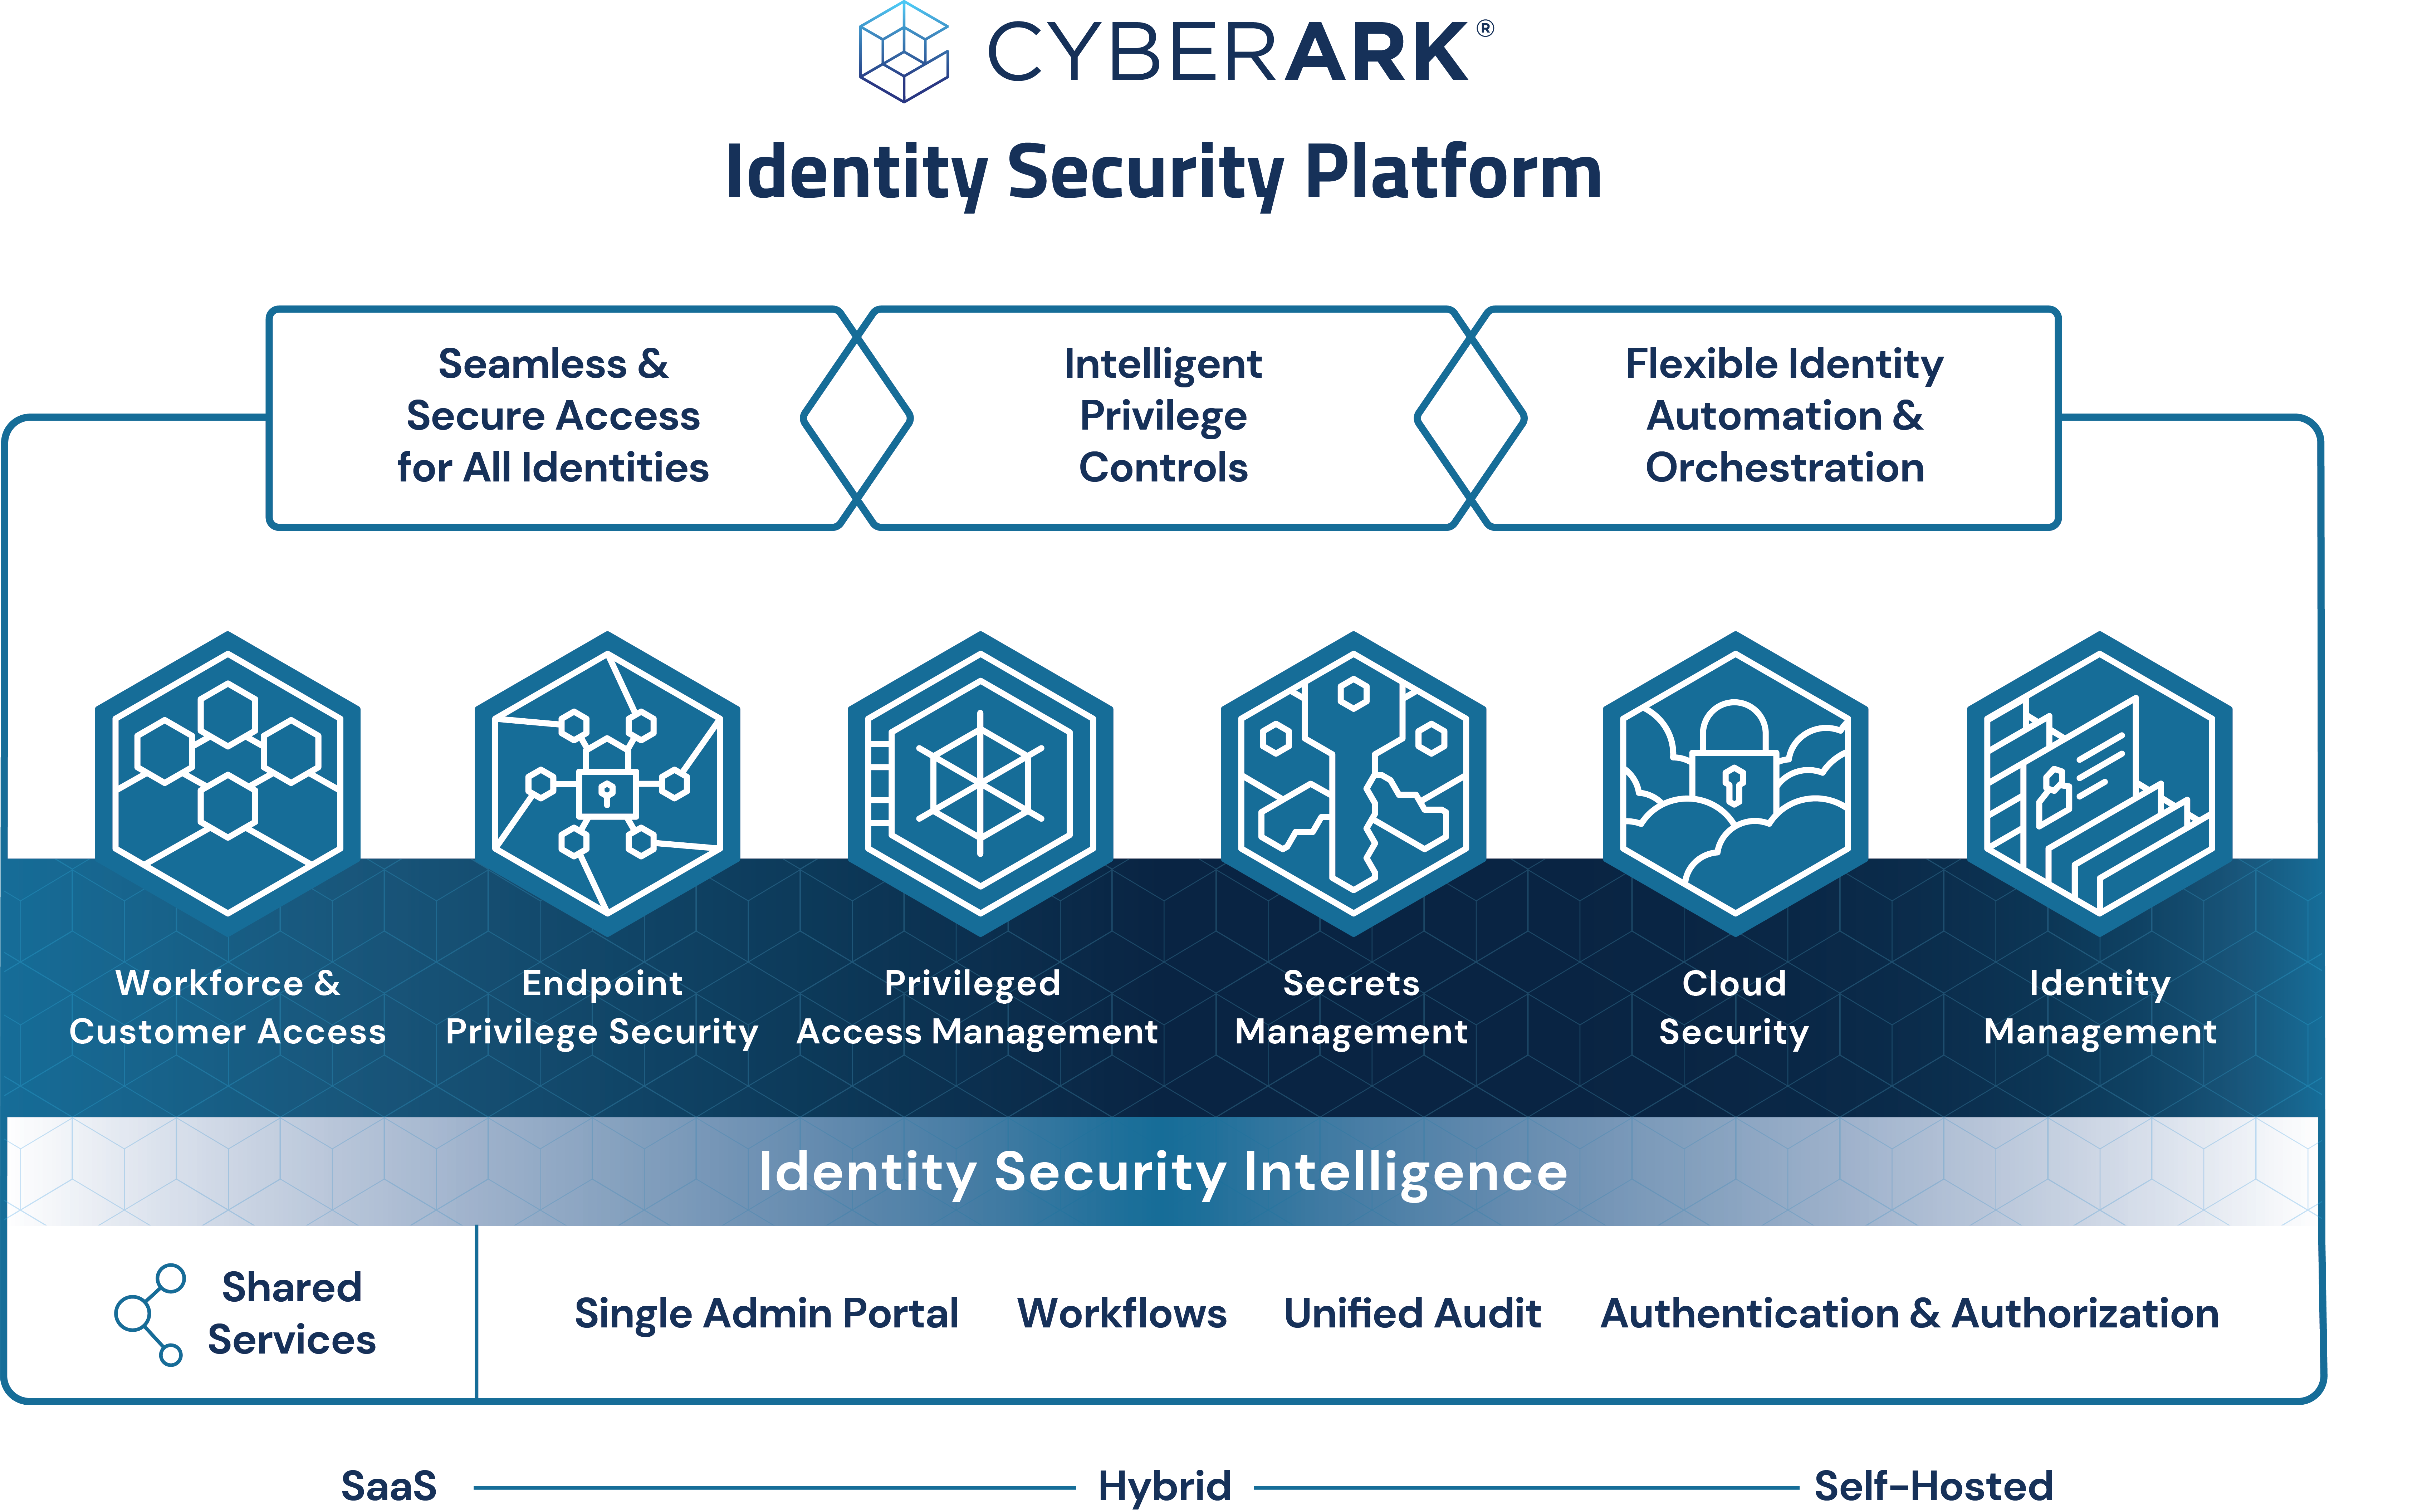 Graphical depiction of CyberArk's identity security platform